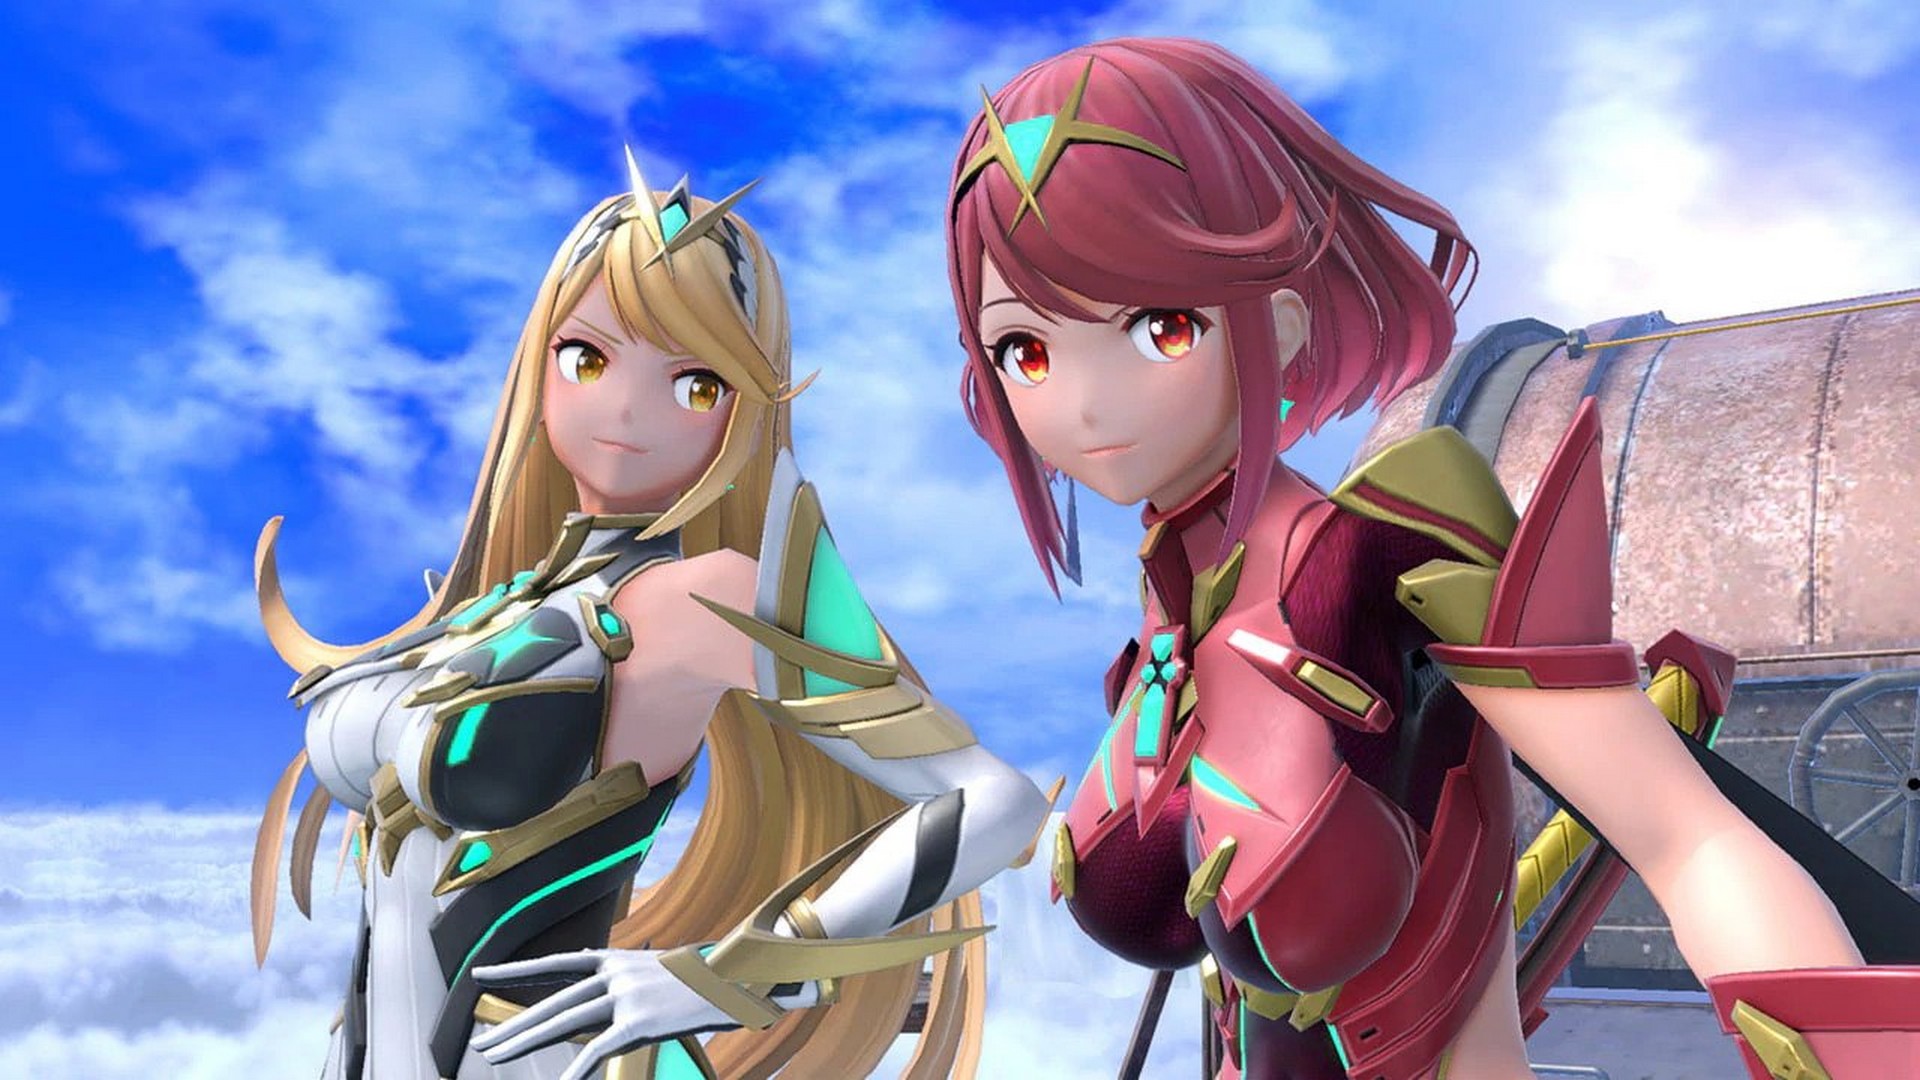 Team Up With The Newly Added Two-In-One Fighter Pyra/Mythra In Super Smash Bros Ultimate Today